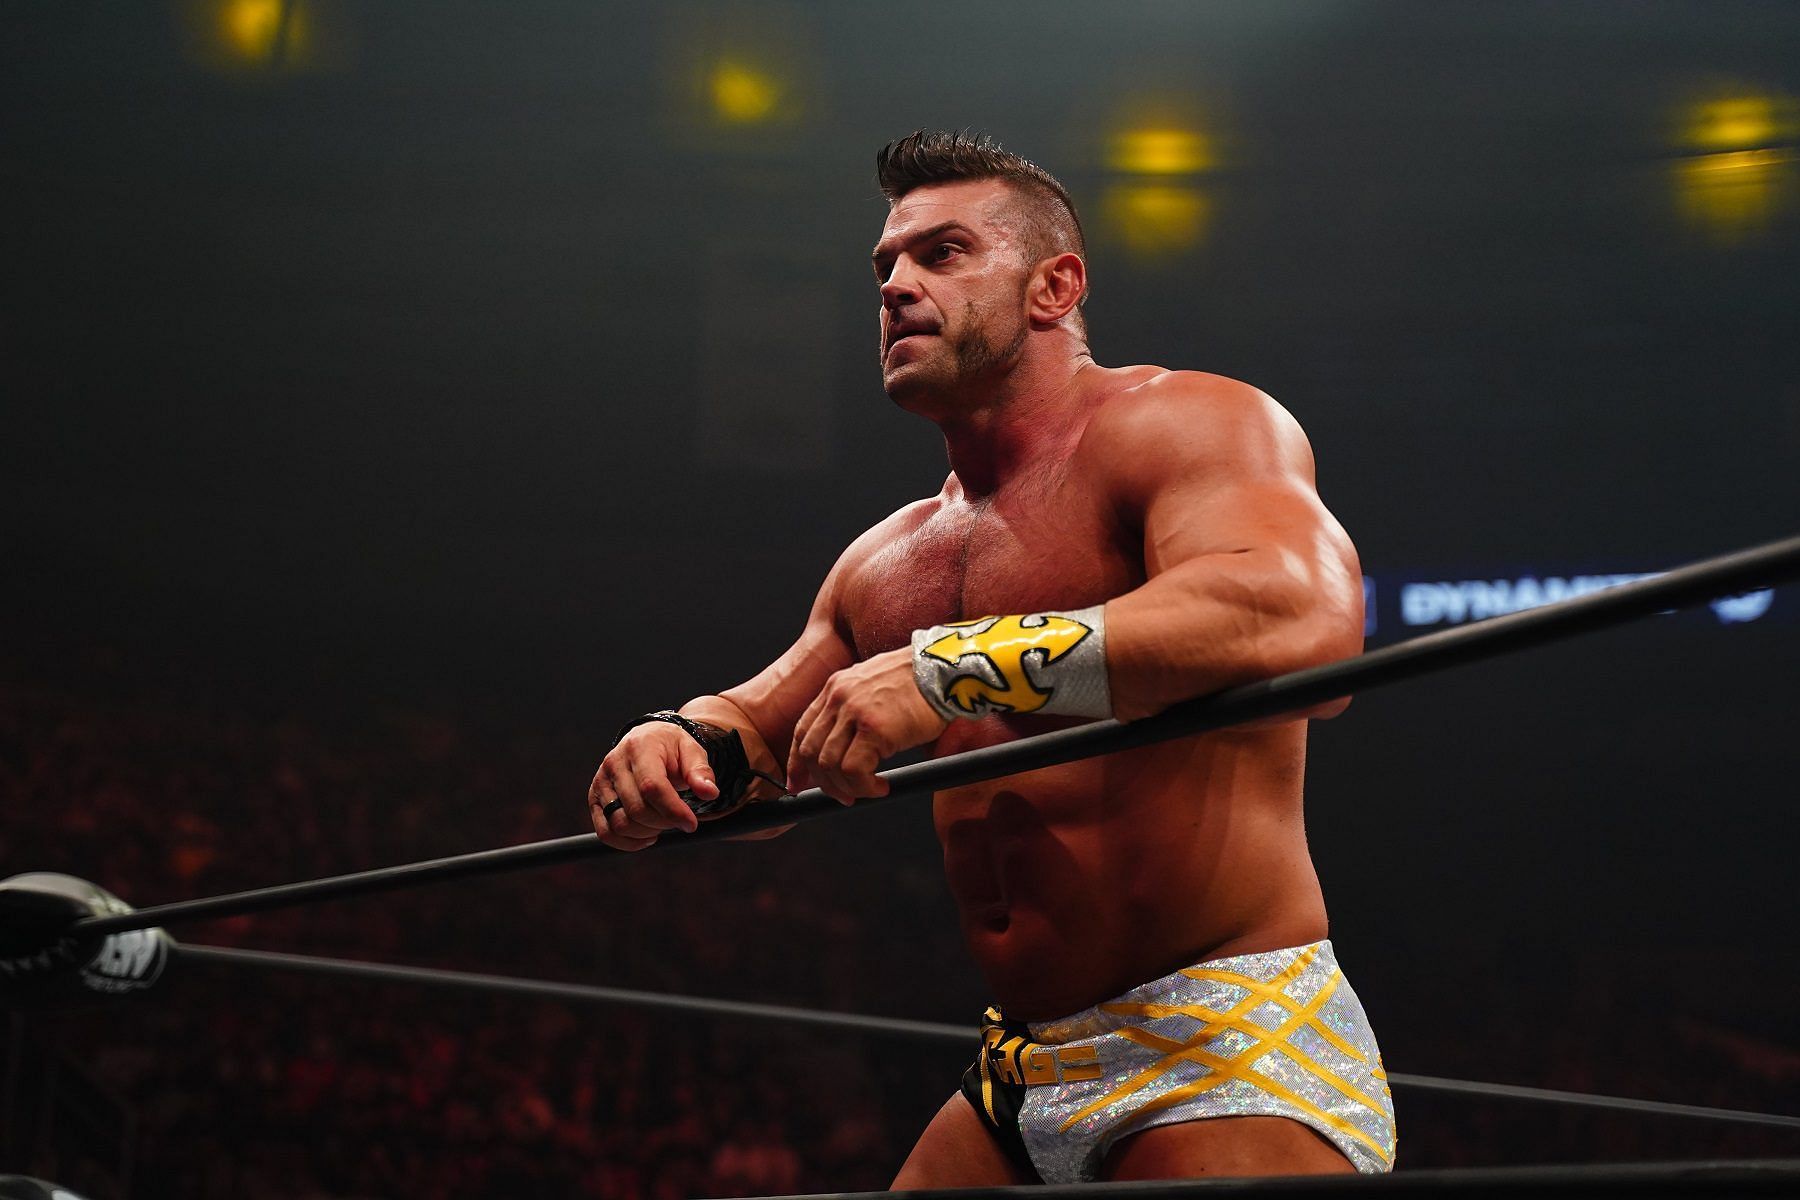 Brian Cage last competed on AEW TV a year ago